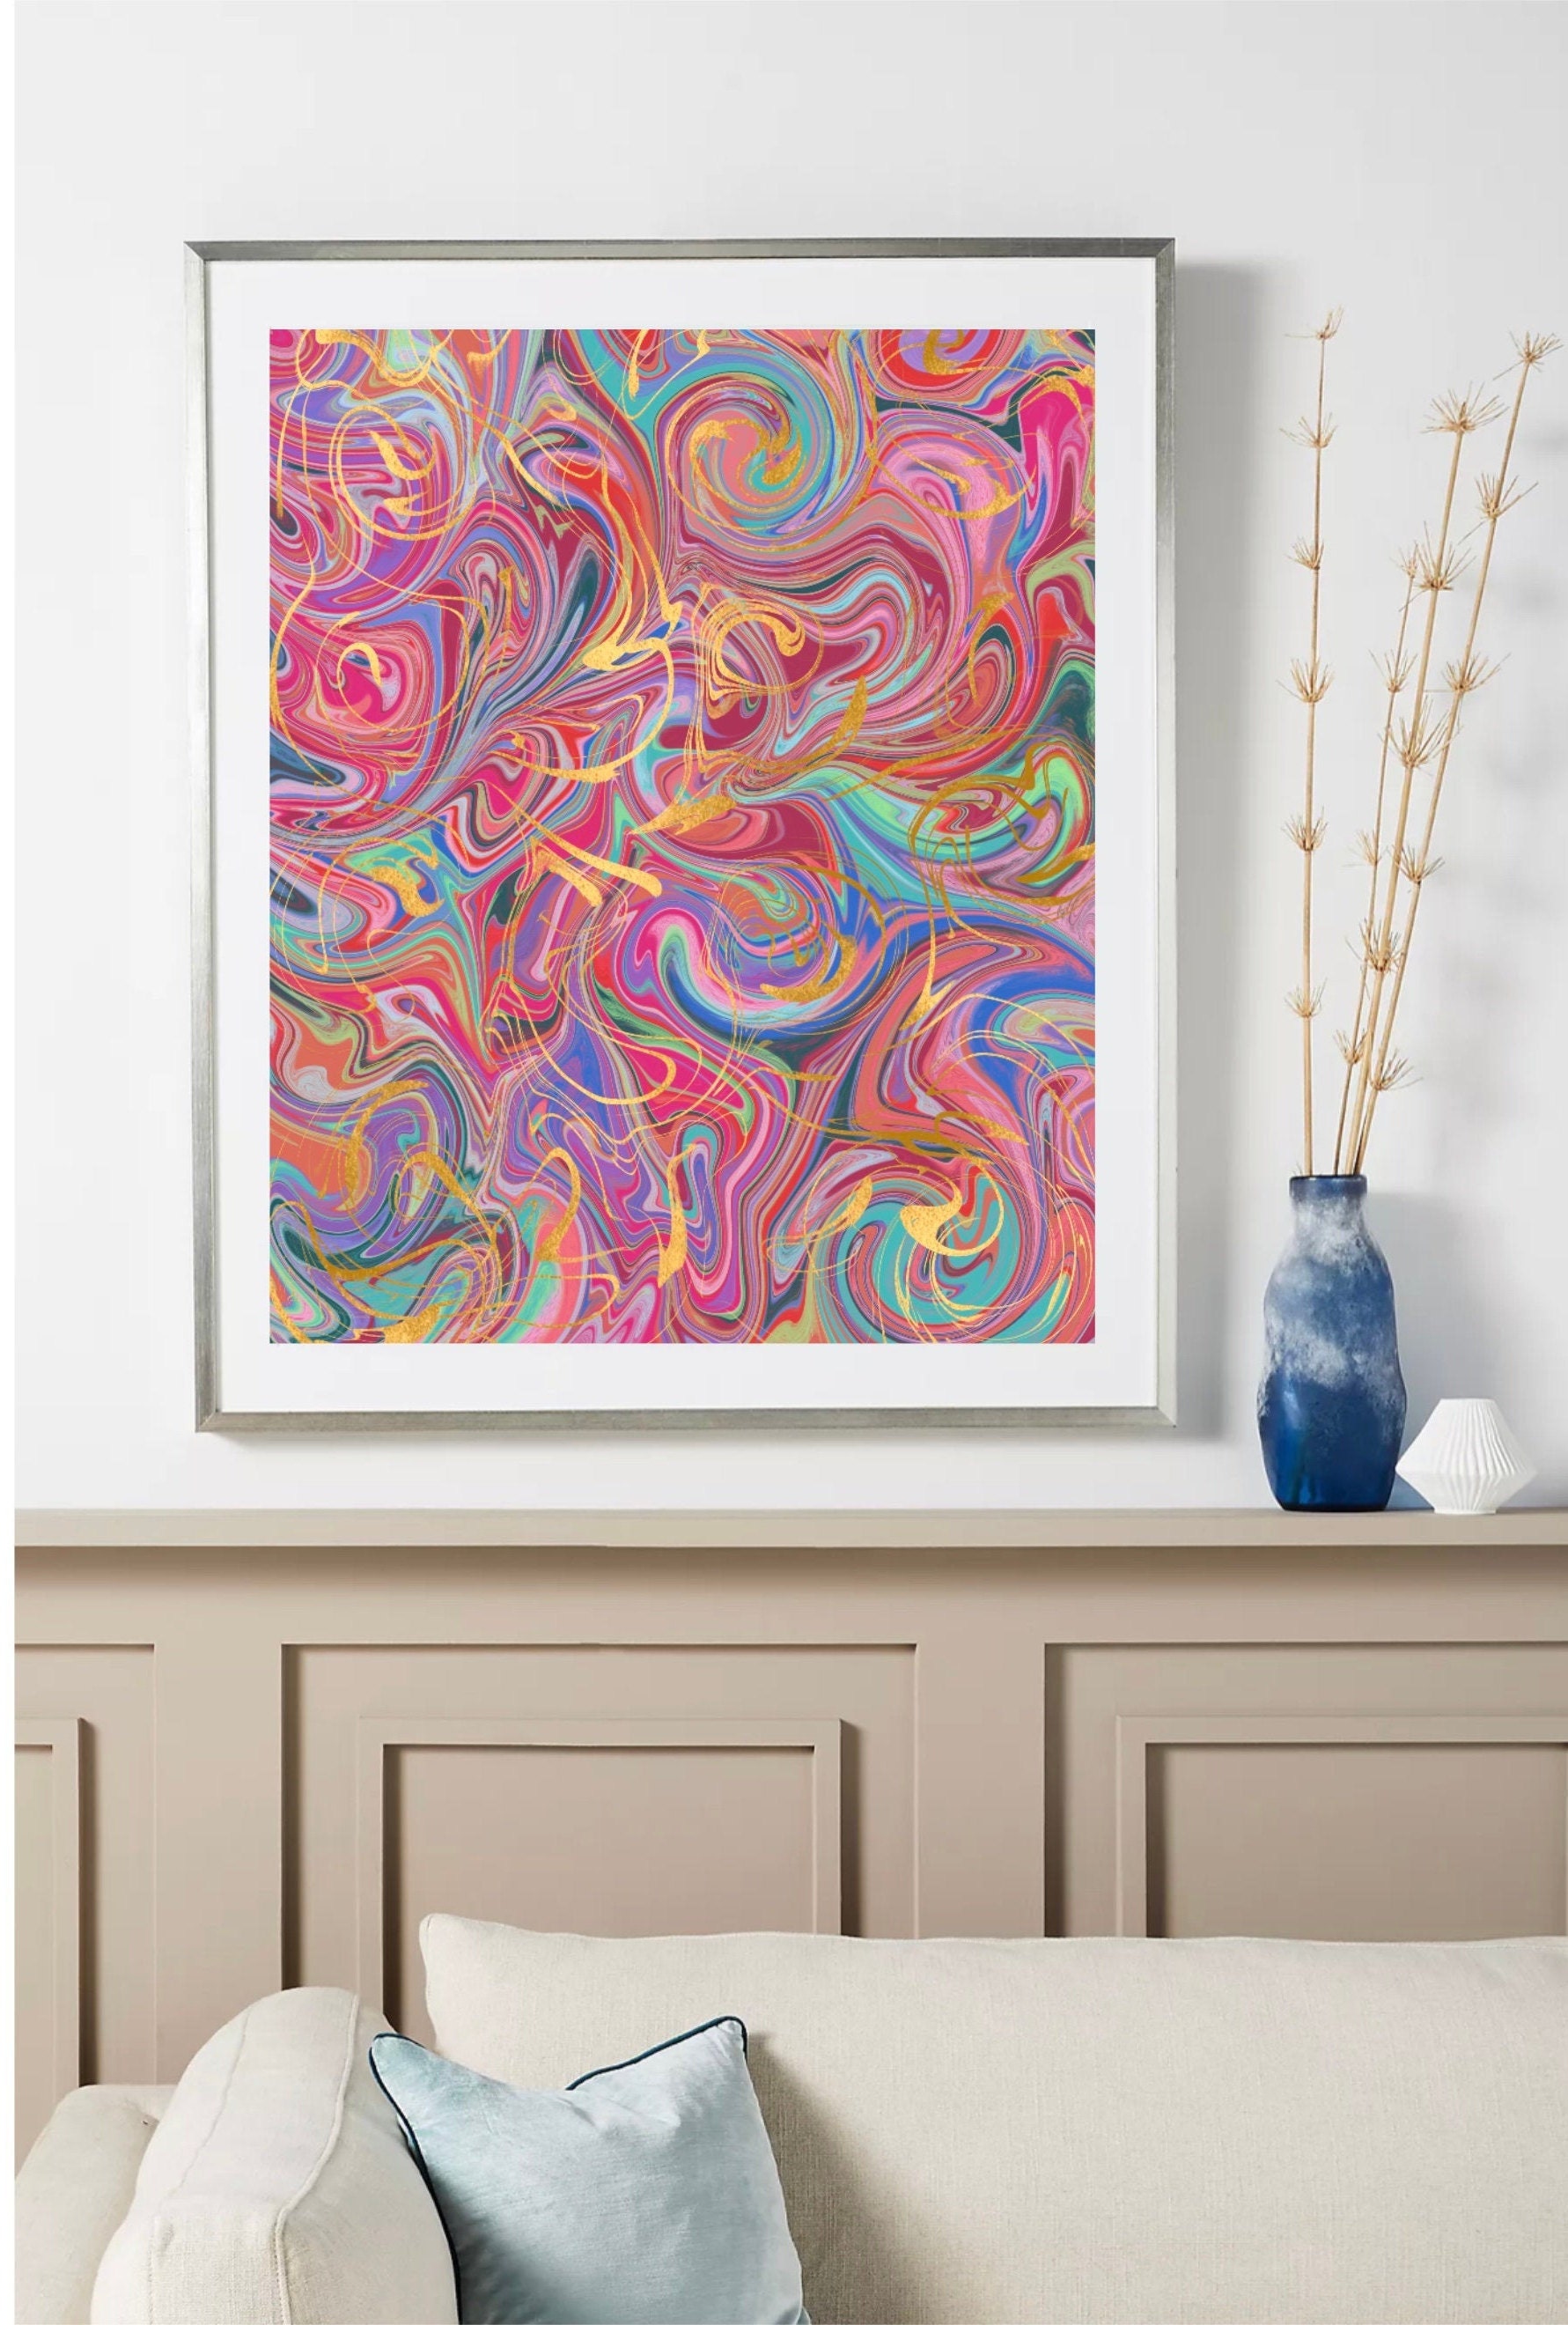 Beyond Rainbow Art Colorful Art With Gold Design Printable - Etsy